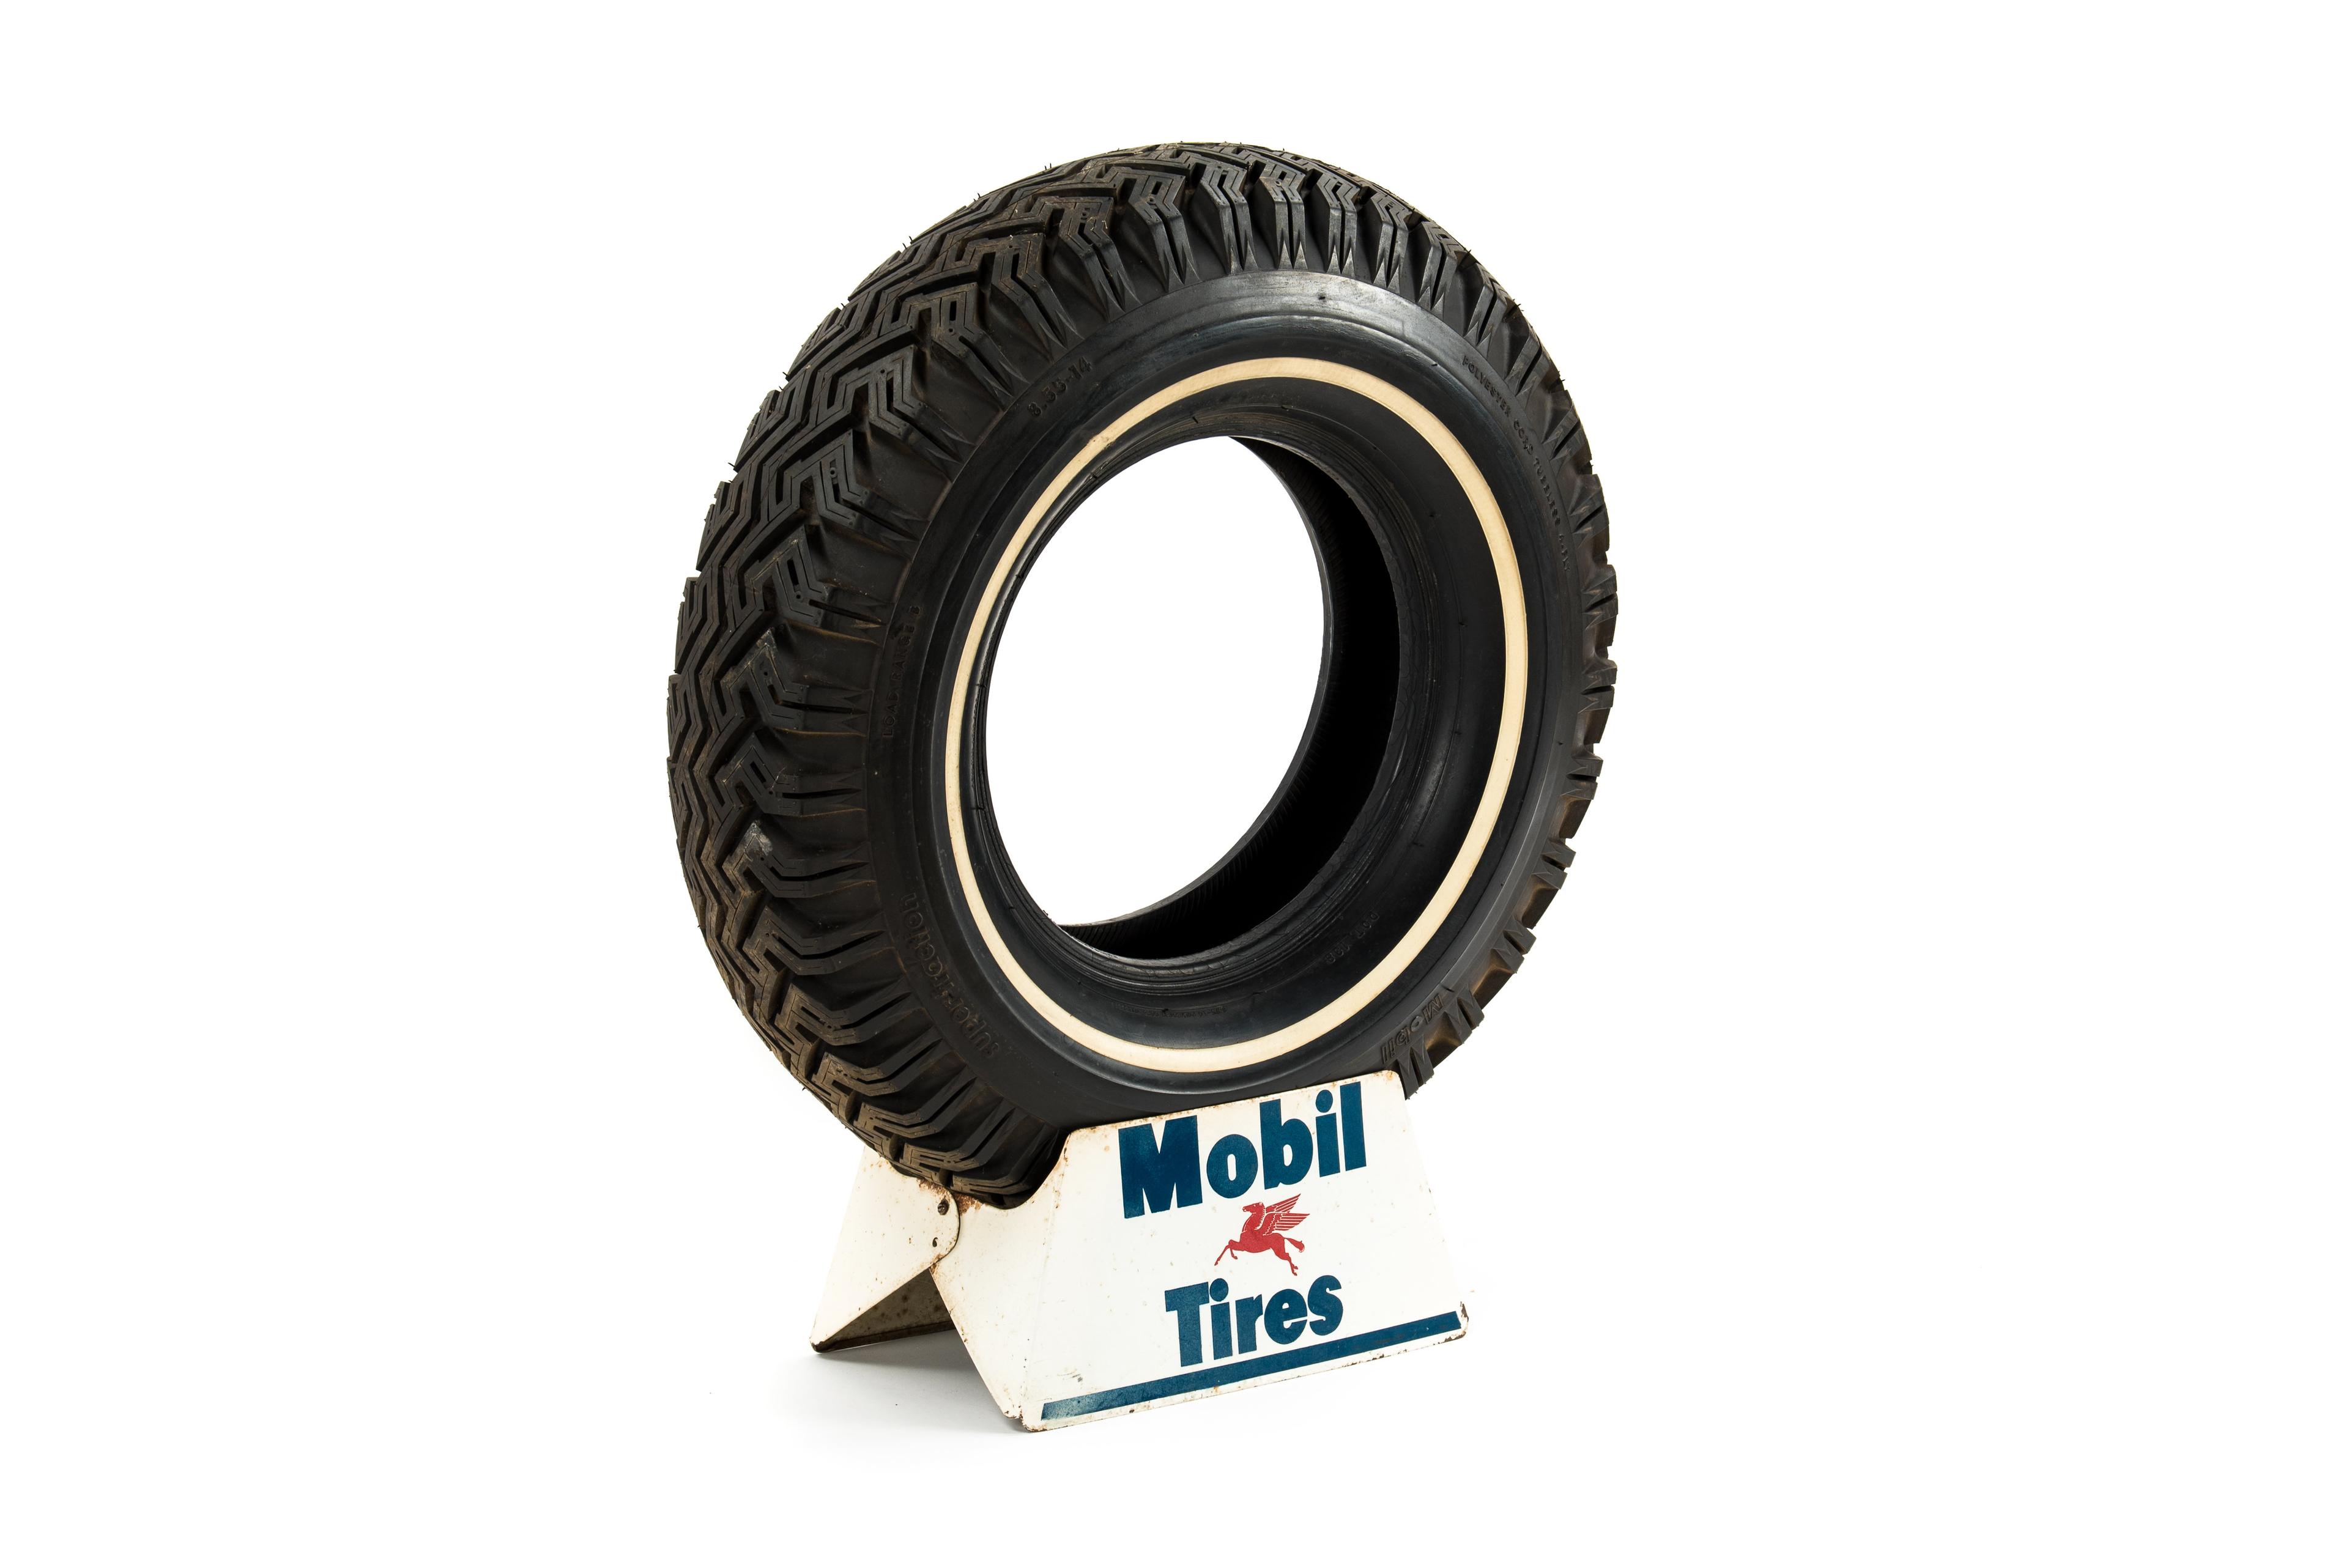 Mobil Tires Tire Display With Mobil Tire